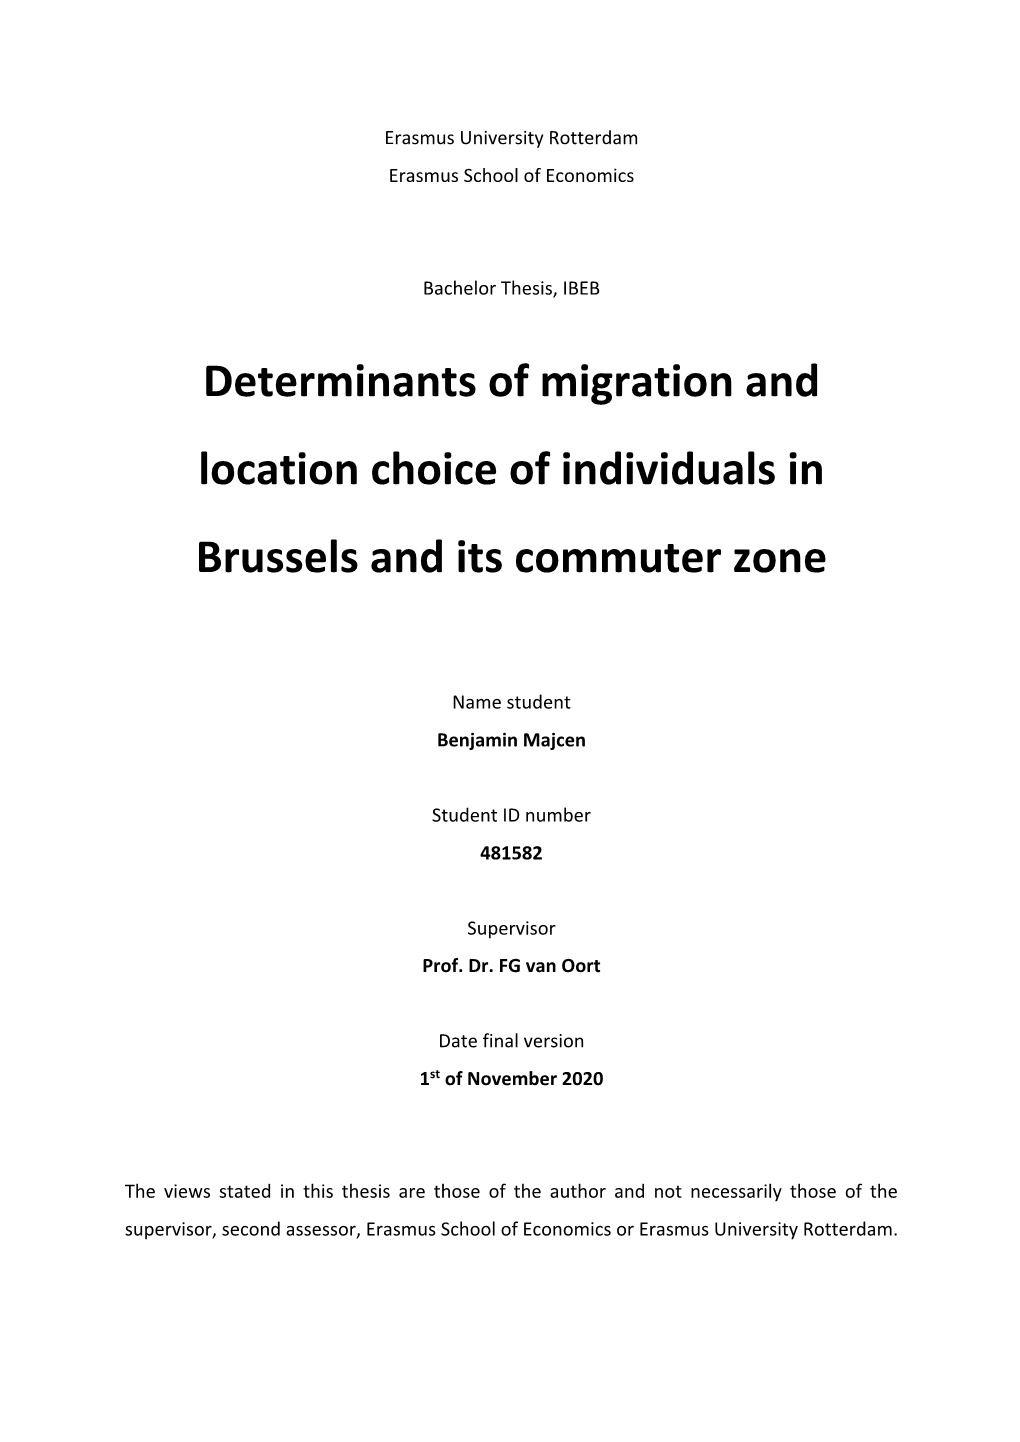 Determinants of Migration and Location Choice of Individuals in Brussels and Its Commuter Zone